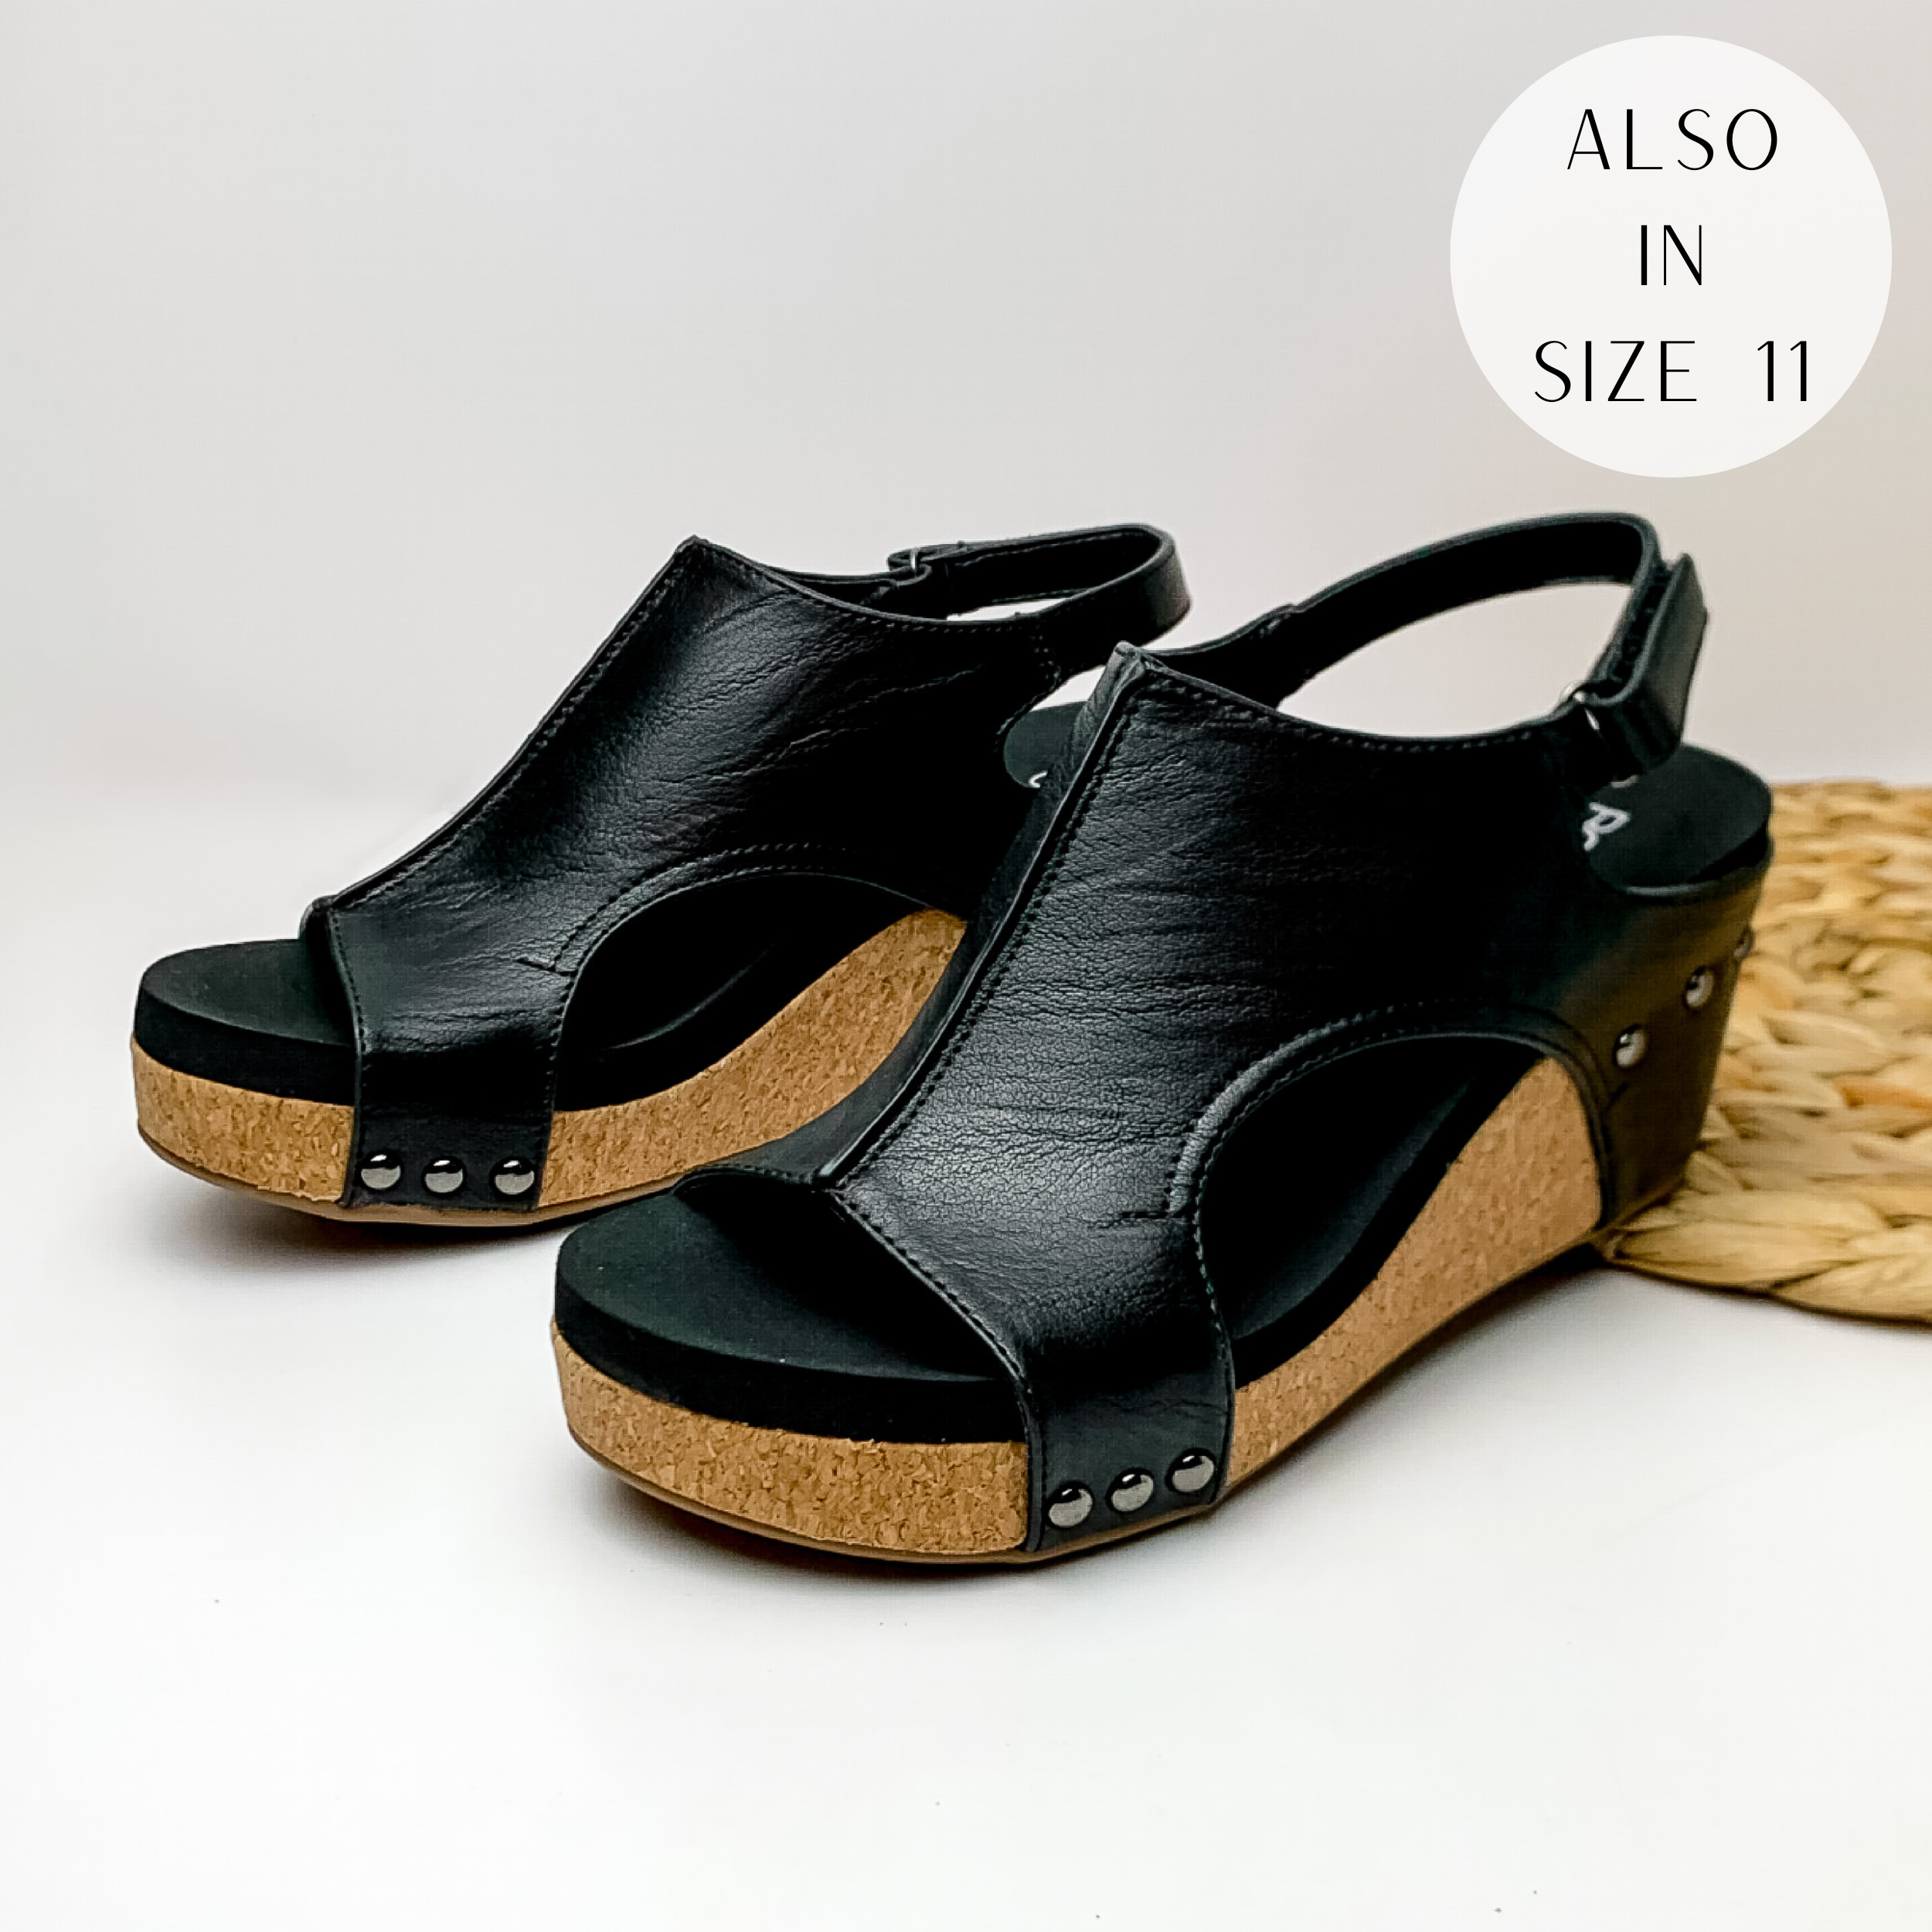 Cork wedges with a black color upper with bronze studs connecting the upper to the wedge. These wedges also include a velco strap. These wedges are pictured on a white background with a basket weave material on the right side of the picture.